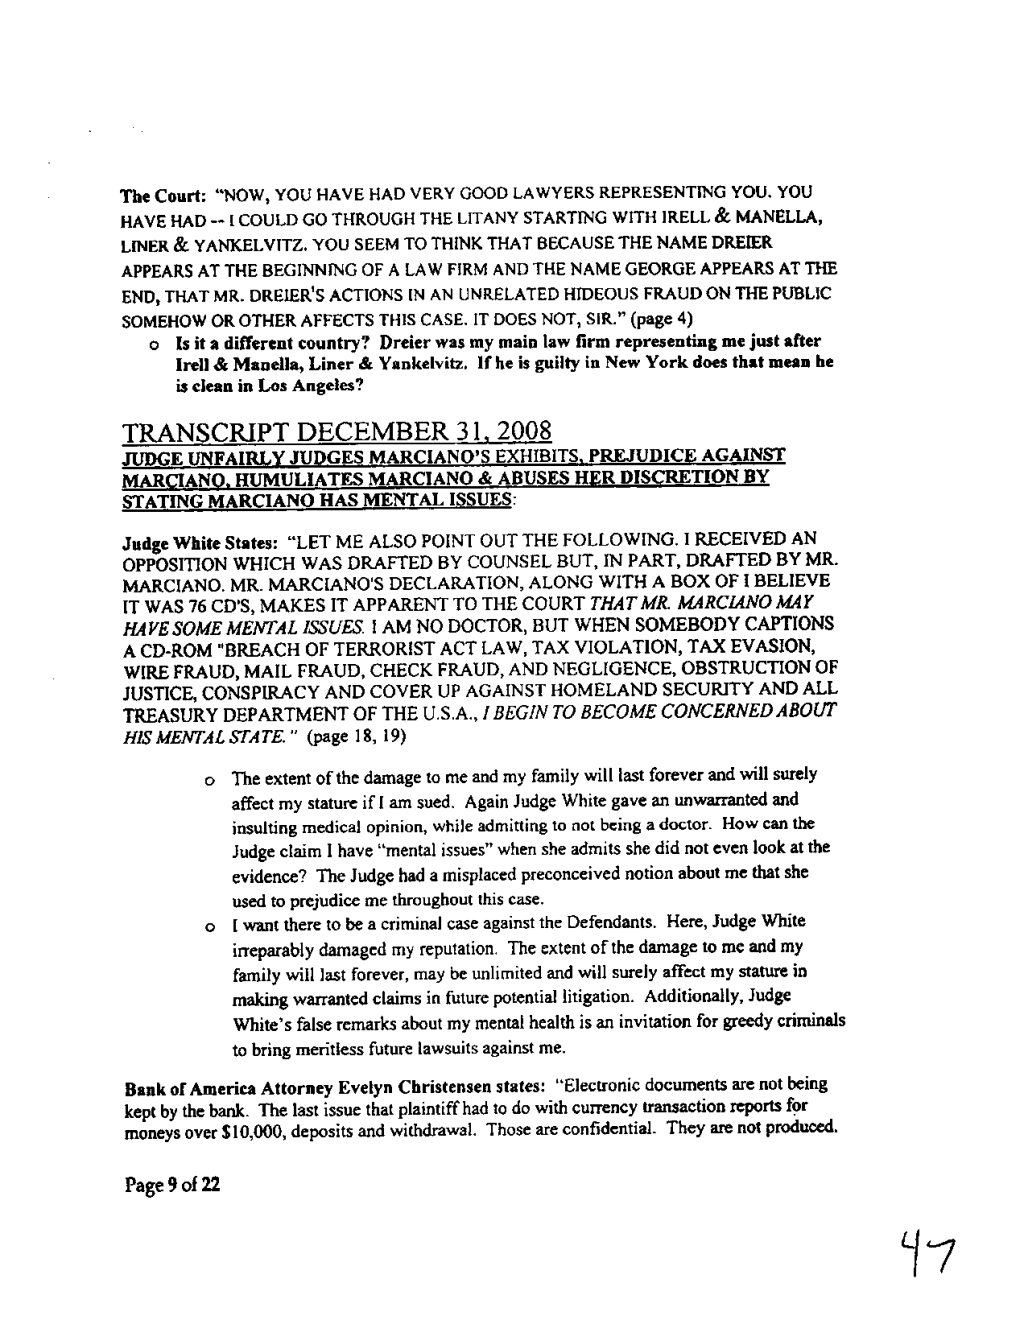 full complaint judge white for federal with exhibits_1_page38